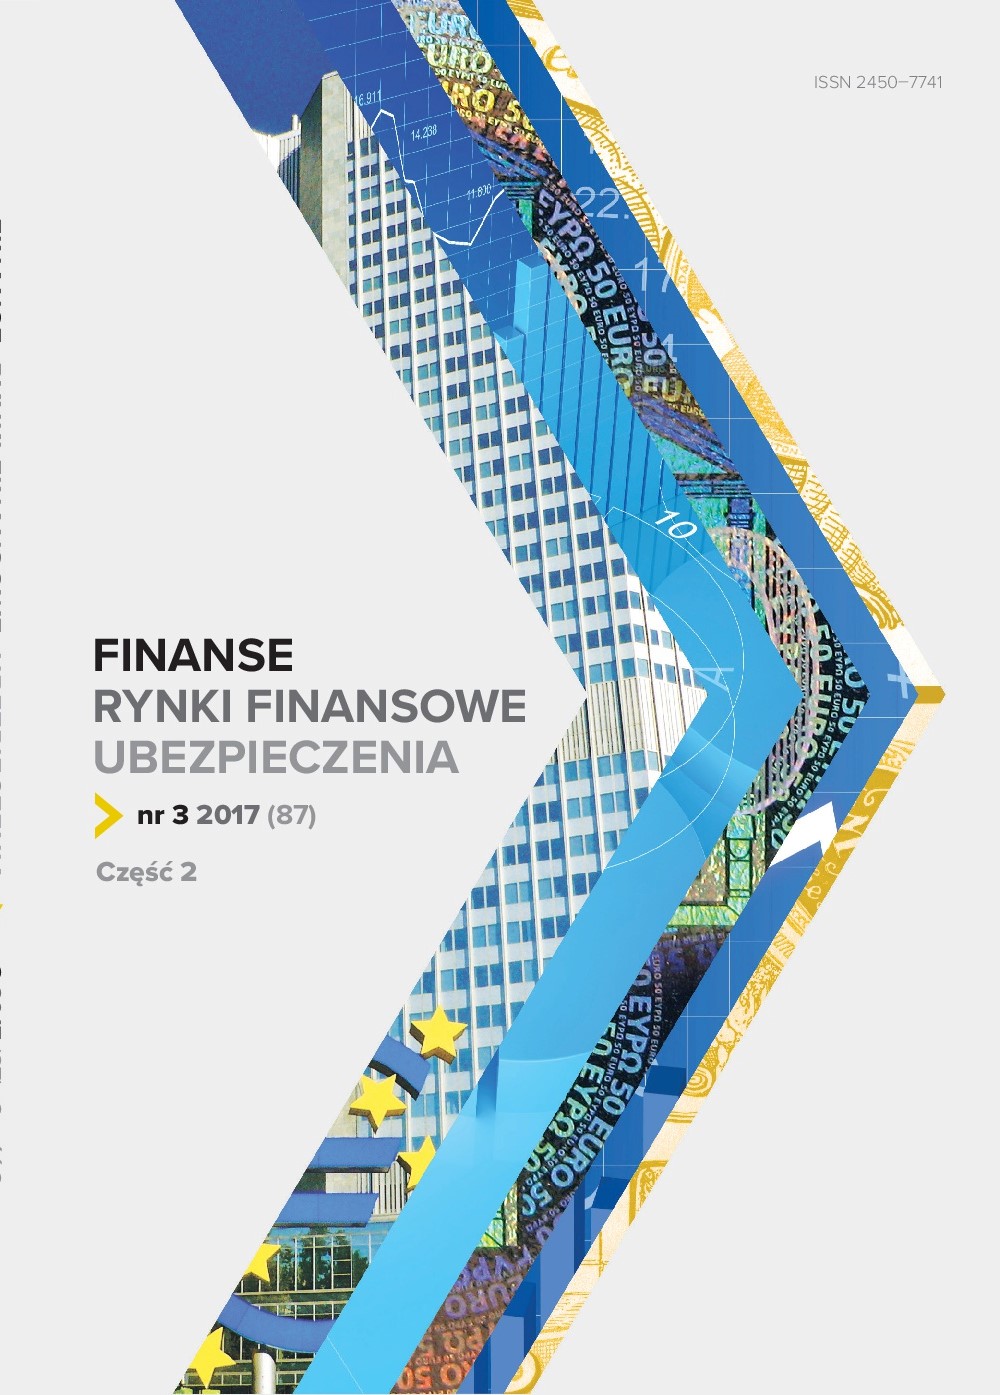 Rate of Tax on Goods and Services in Poland and Realization of Tax Optimization Cover Image